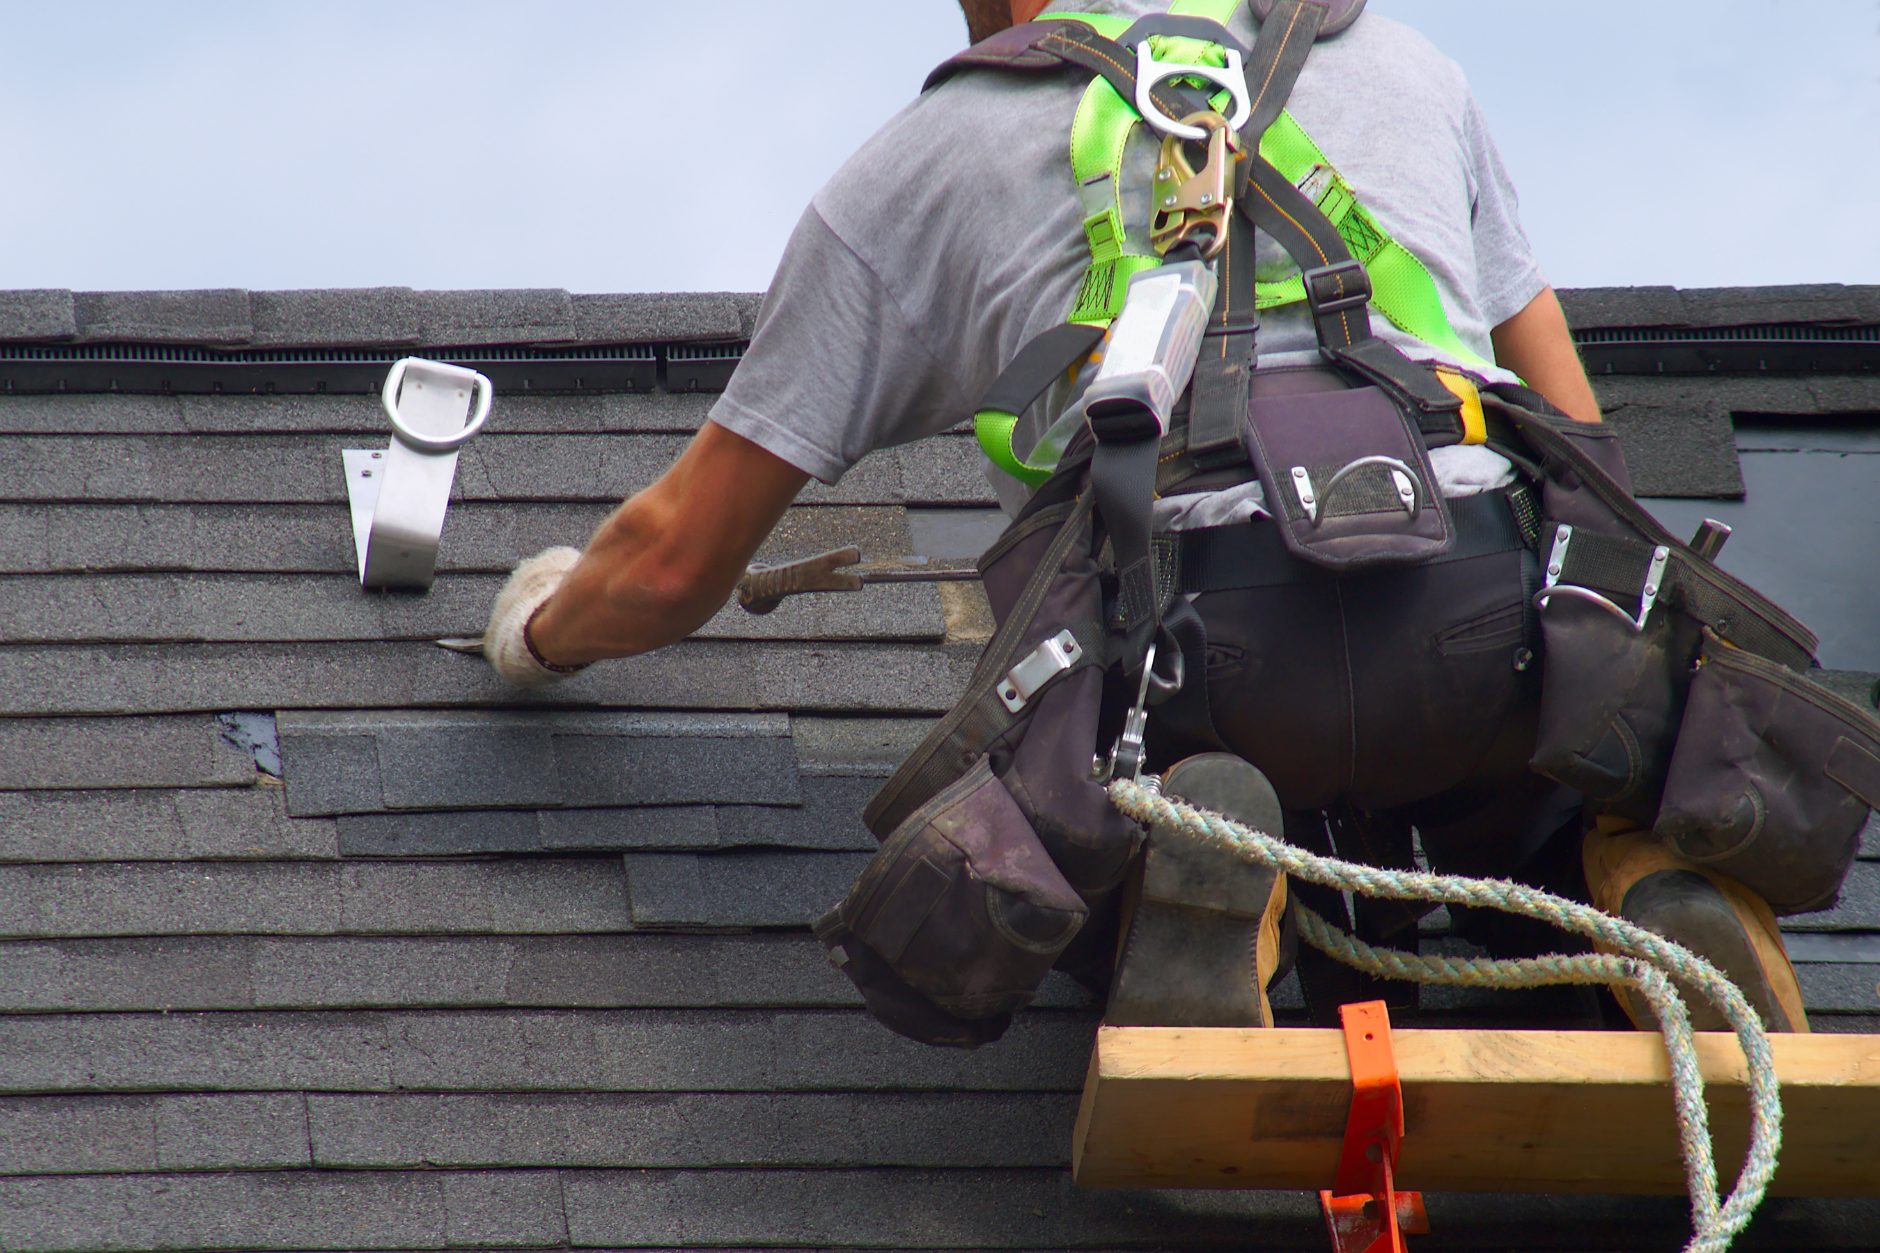 Insurance for Roofers